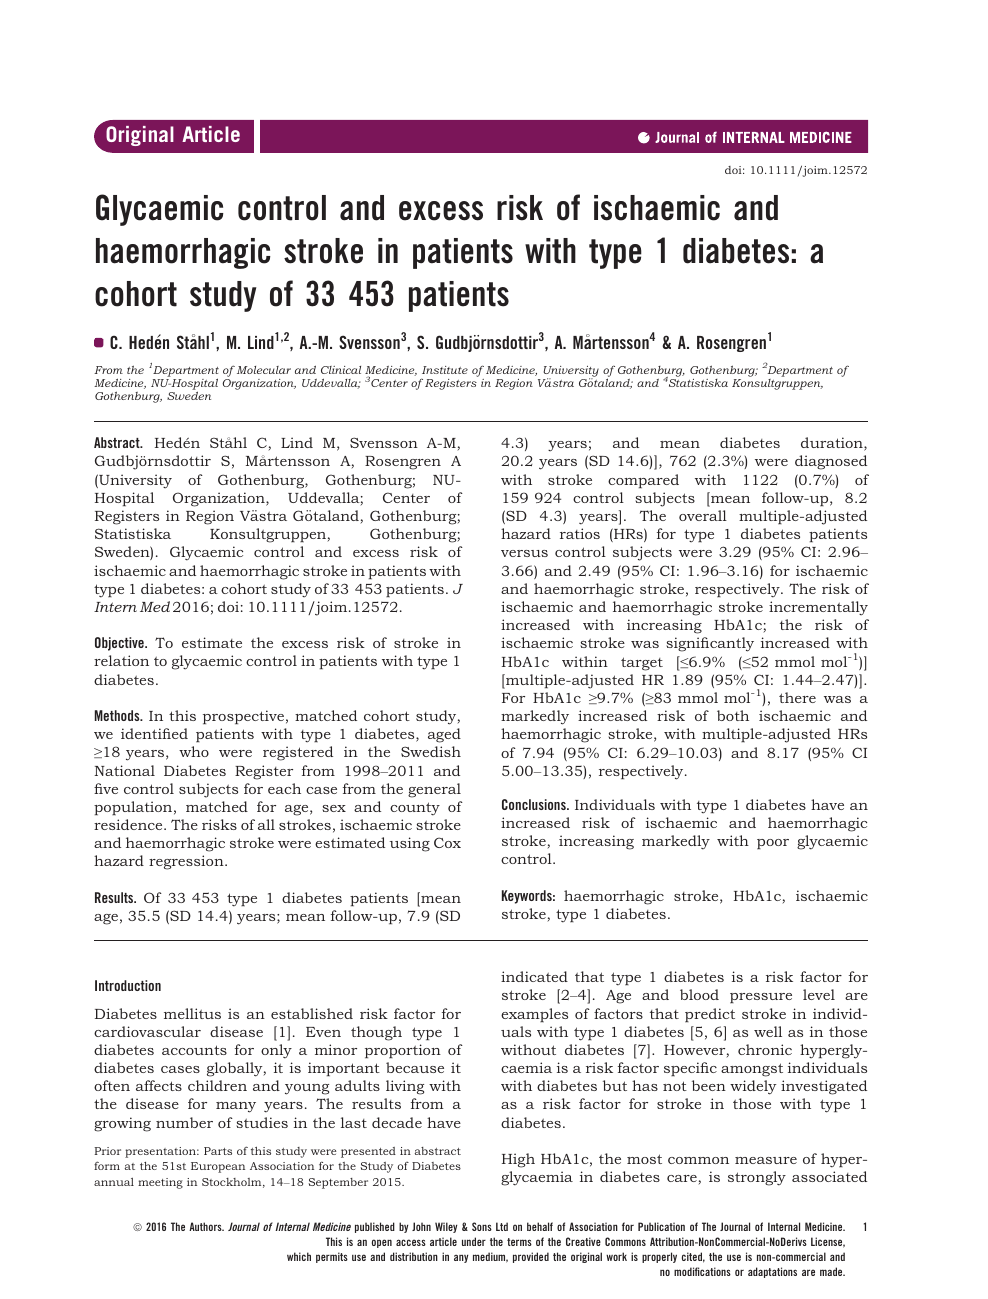 Glycaemic Control And Excess Risk Of Ischaemic And Haemorrhagic Stroke In Patients With Type 1 Diabetes A Cohort Study Of 33 453 Patients Topic Of Research Paper In Biological Sciences Download